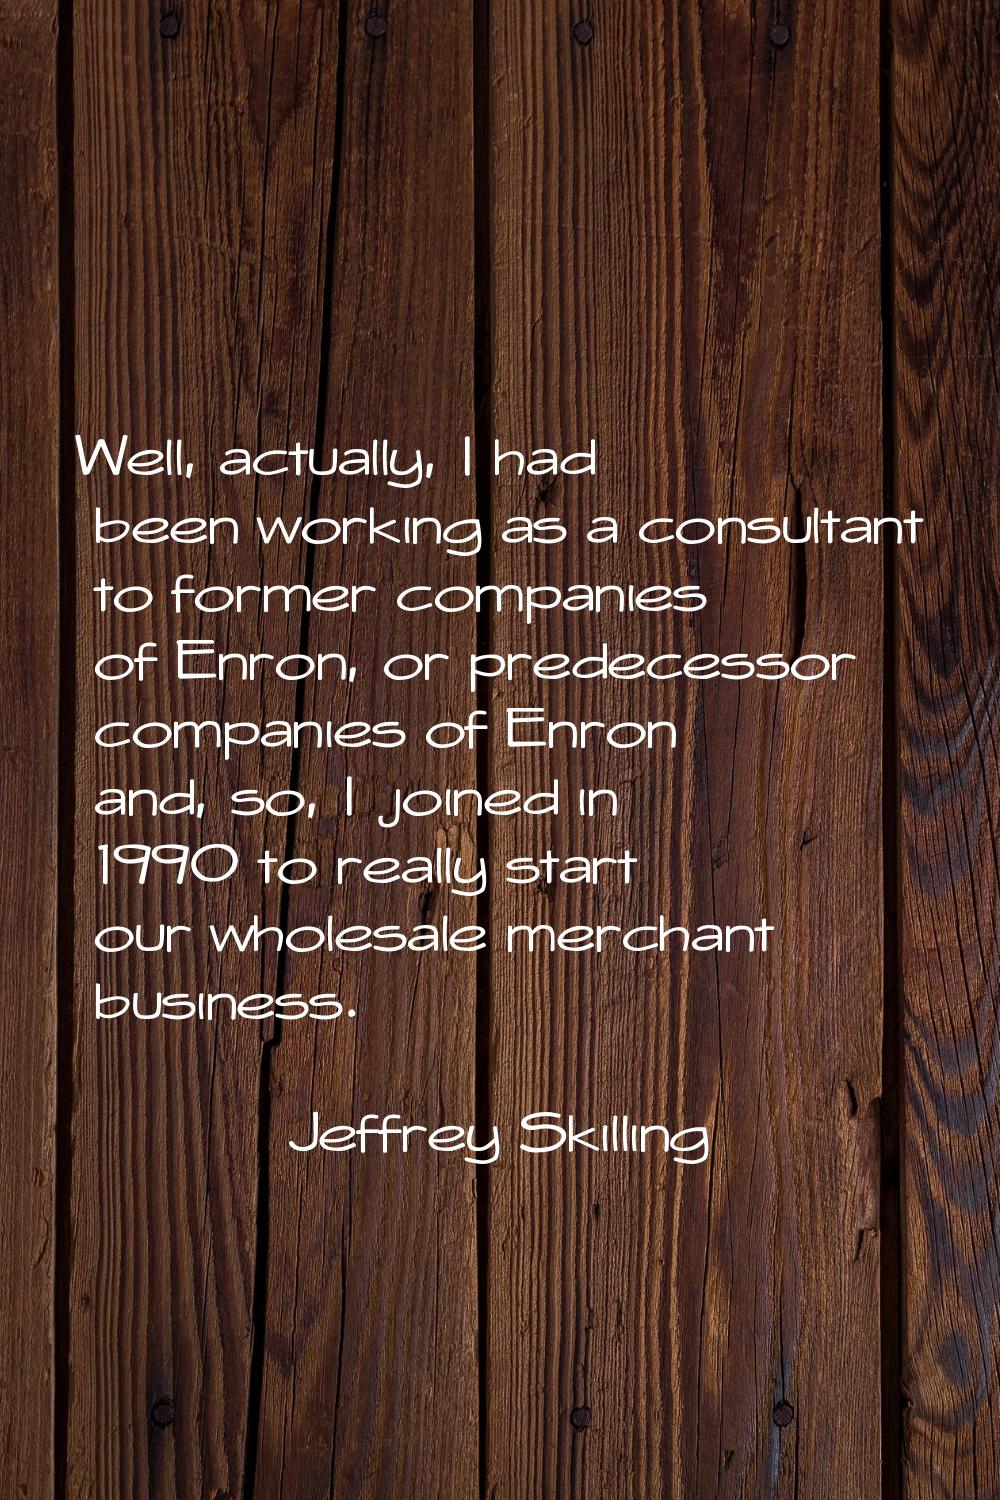 Well, actually, I had been working as a consultant to former companies of Enron, or predecessor com